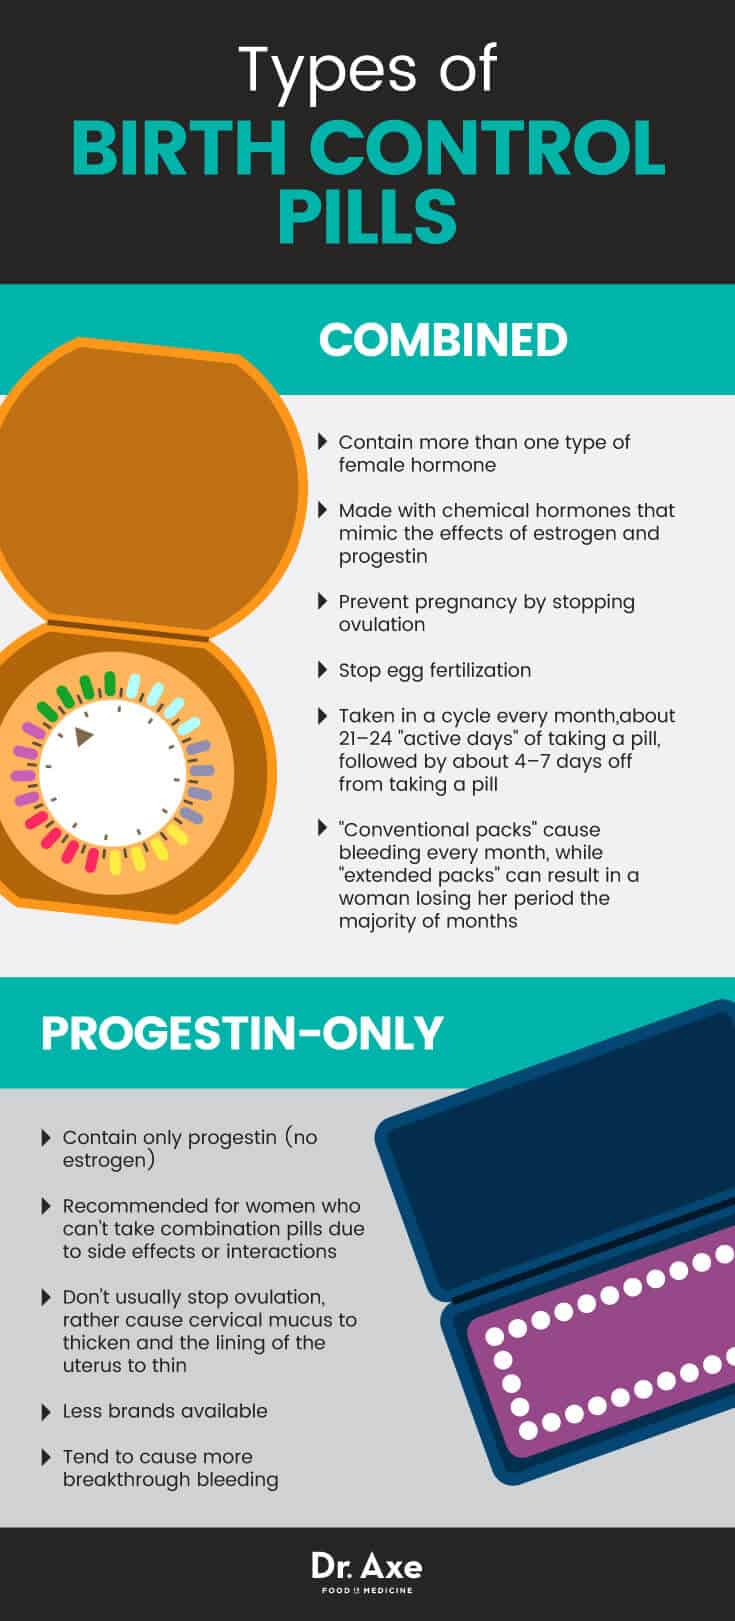 Types of birth control pills - Dr. Axe